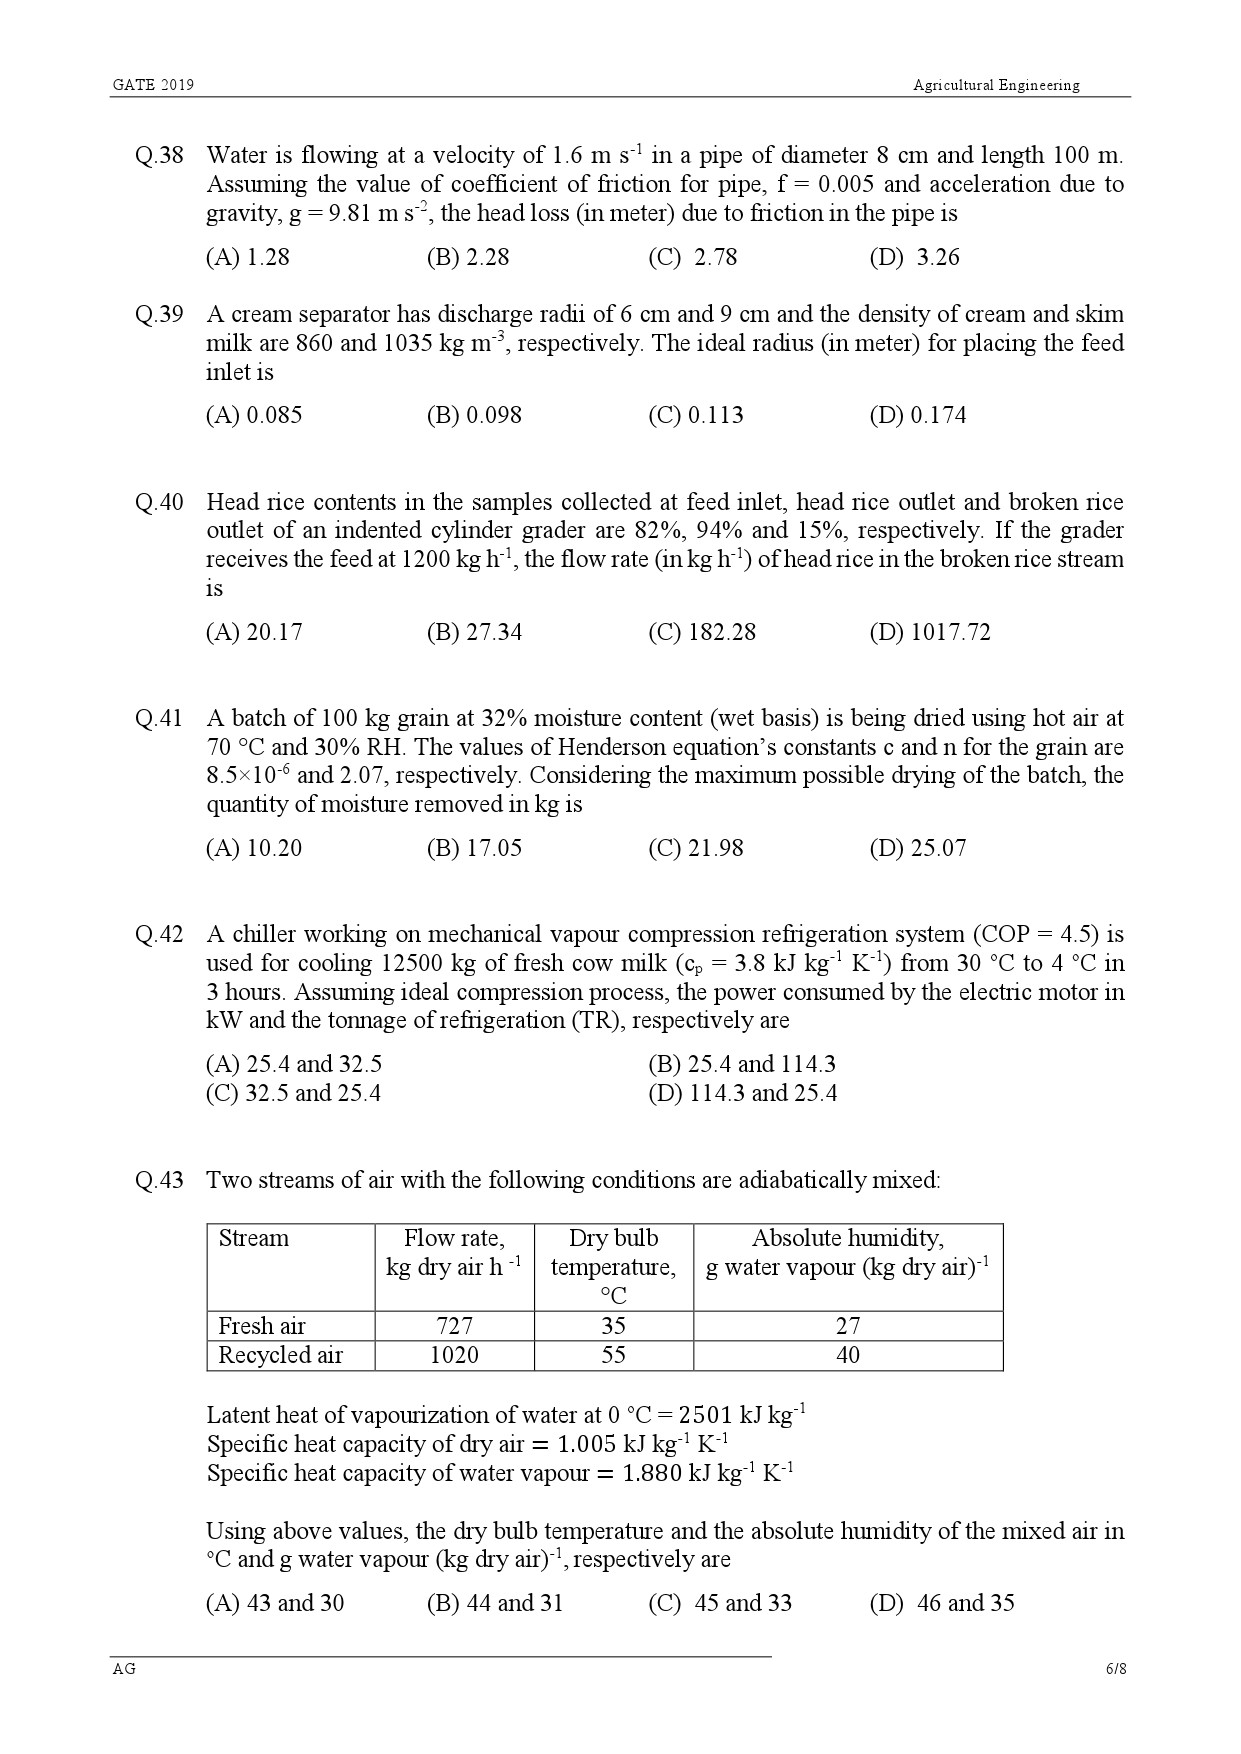 GATE Exam Question Paper 2019 Agricultural Engineering 6